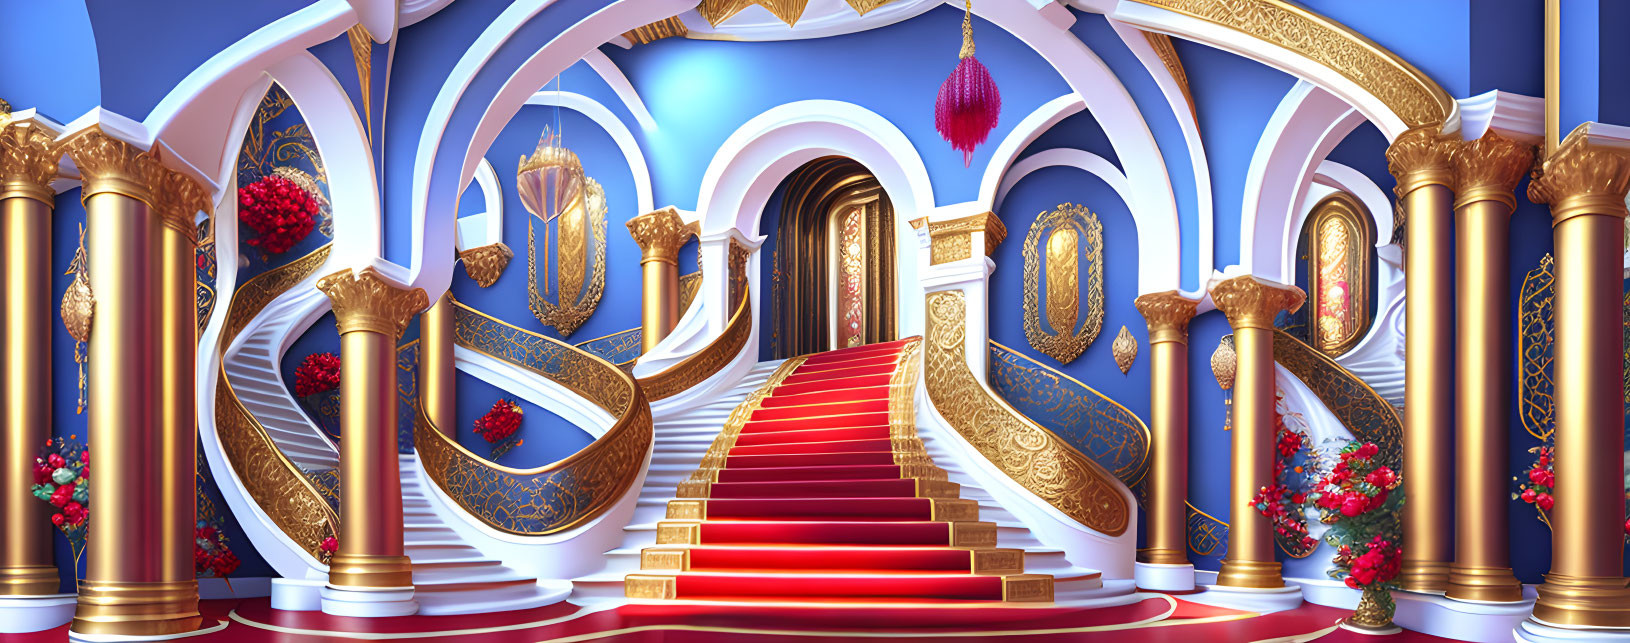 Luxurious interior with grand staircases, red carpet, golden railings, ornate columns, blue